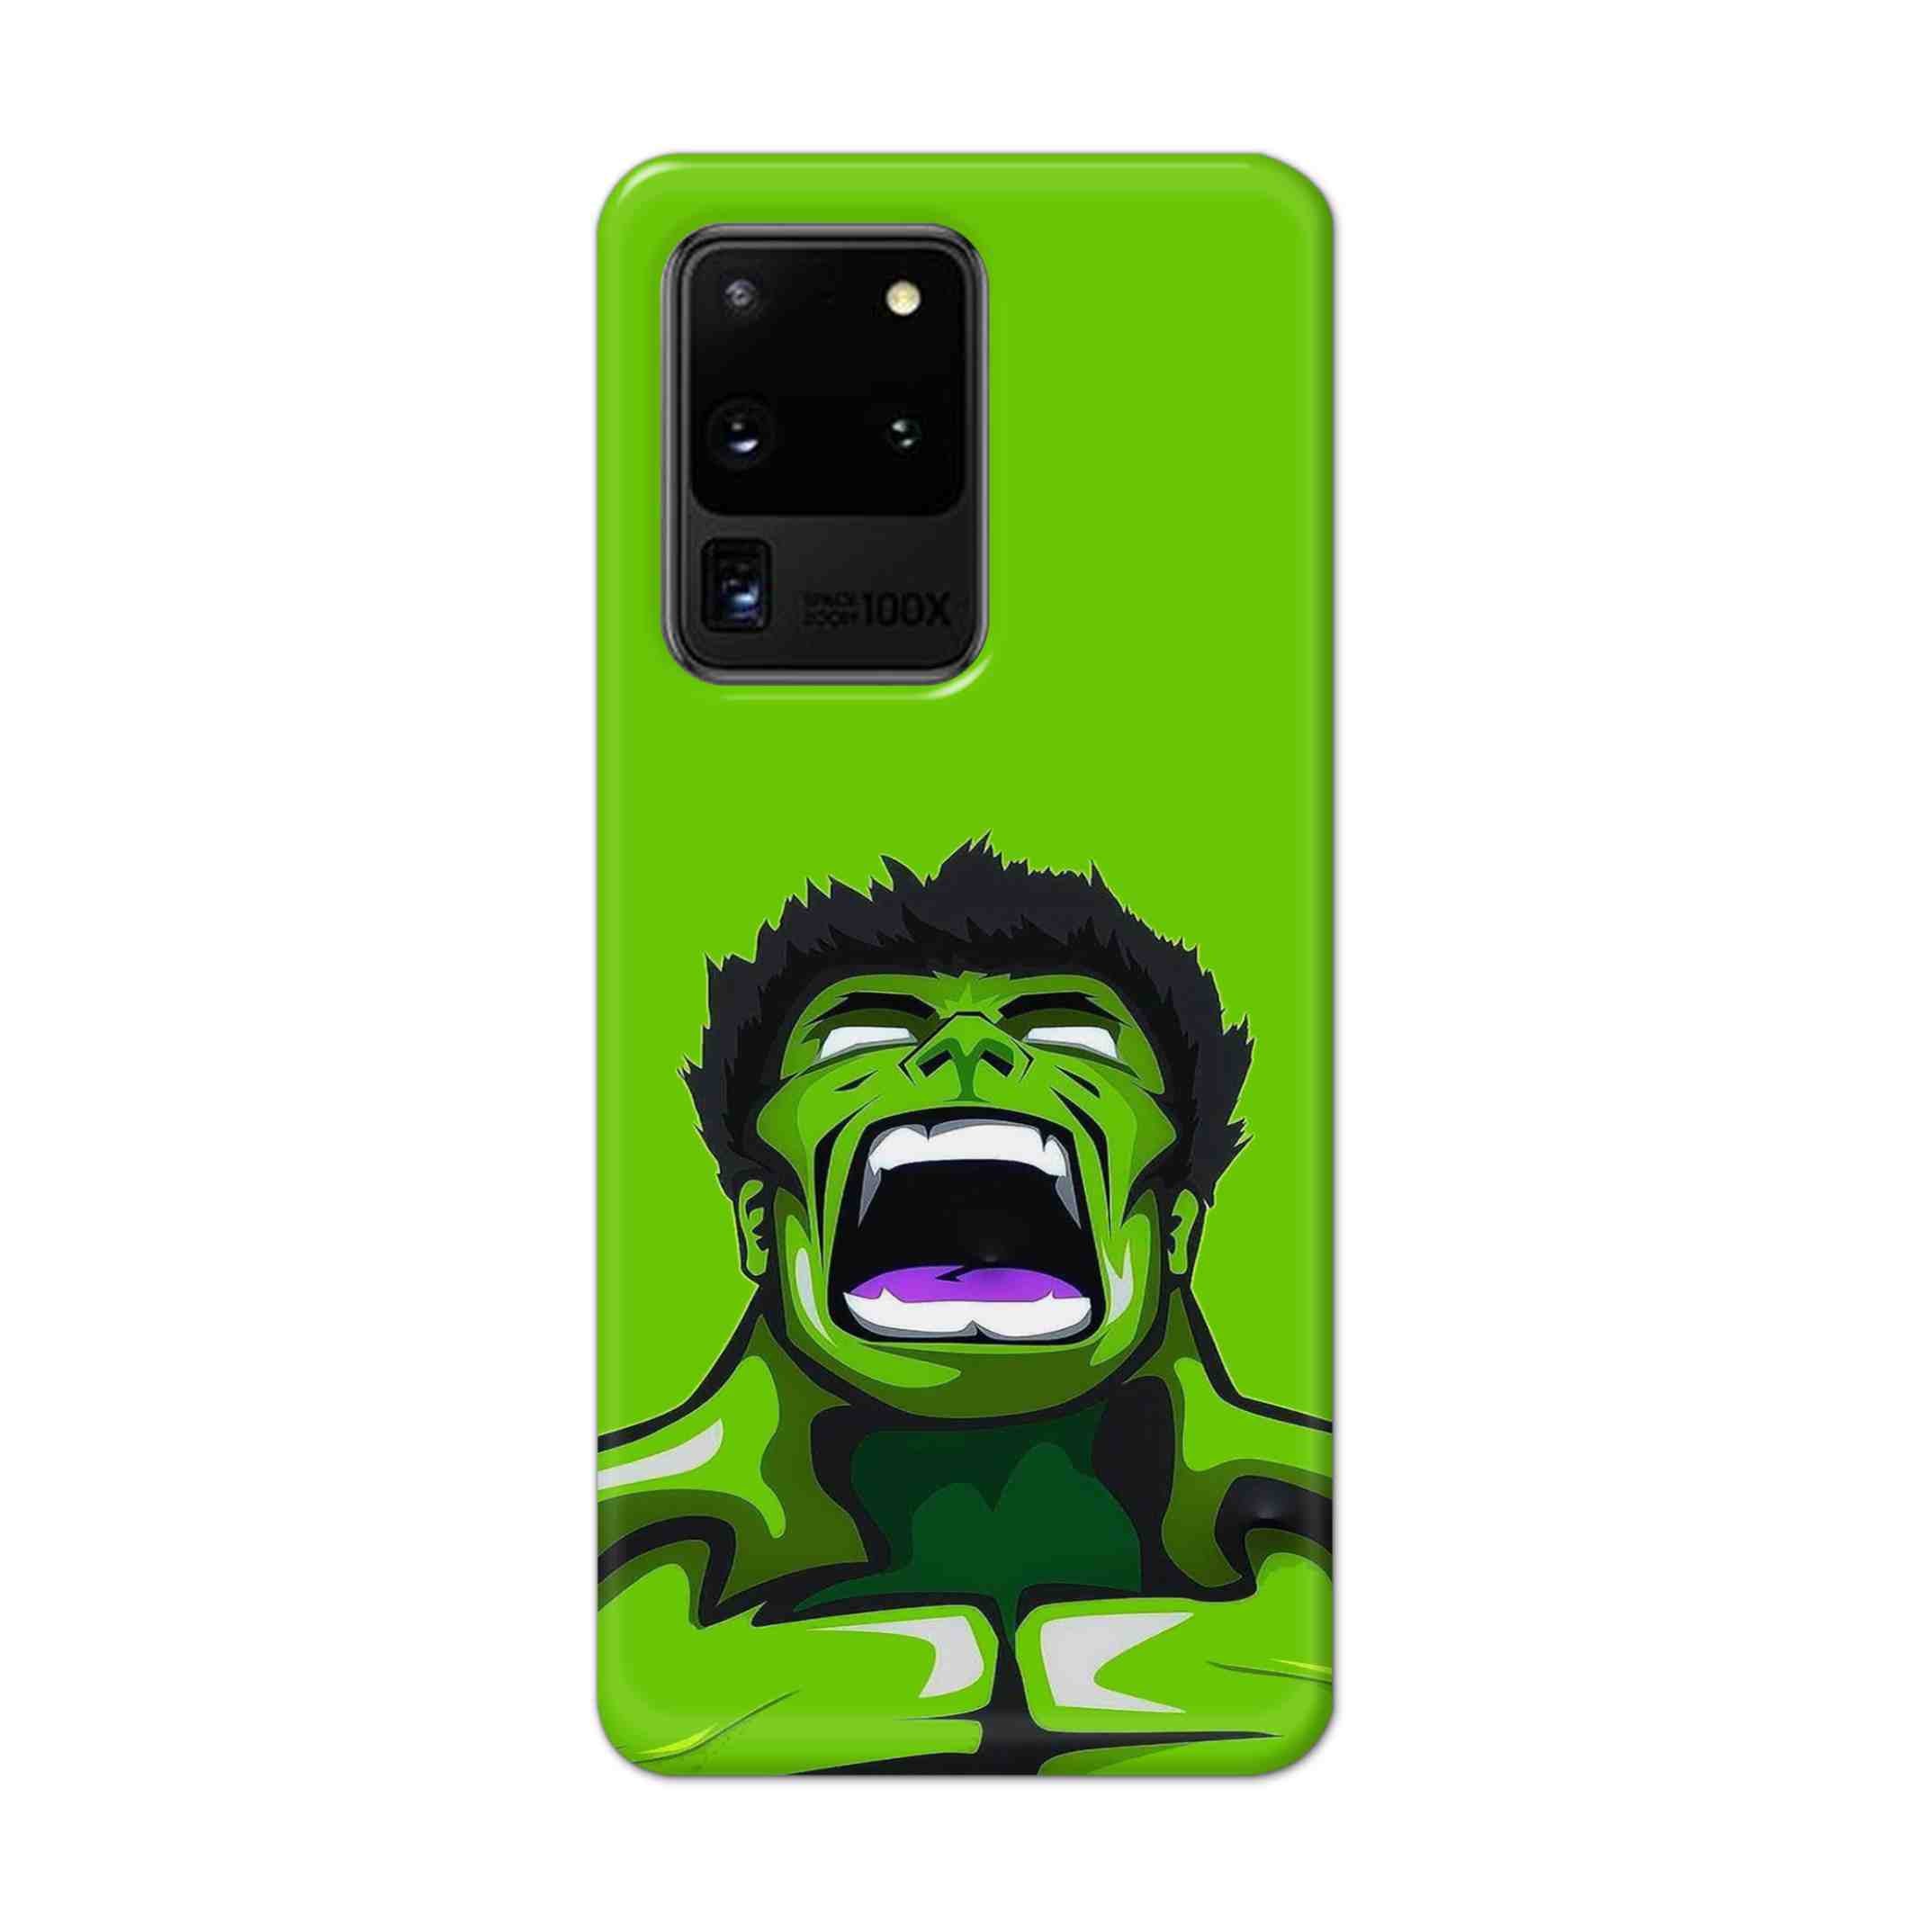 Buy Green Hulk Hard Back Mobile Phone Case Cover For Samsung Galaxy S20 Ultra Online